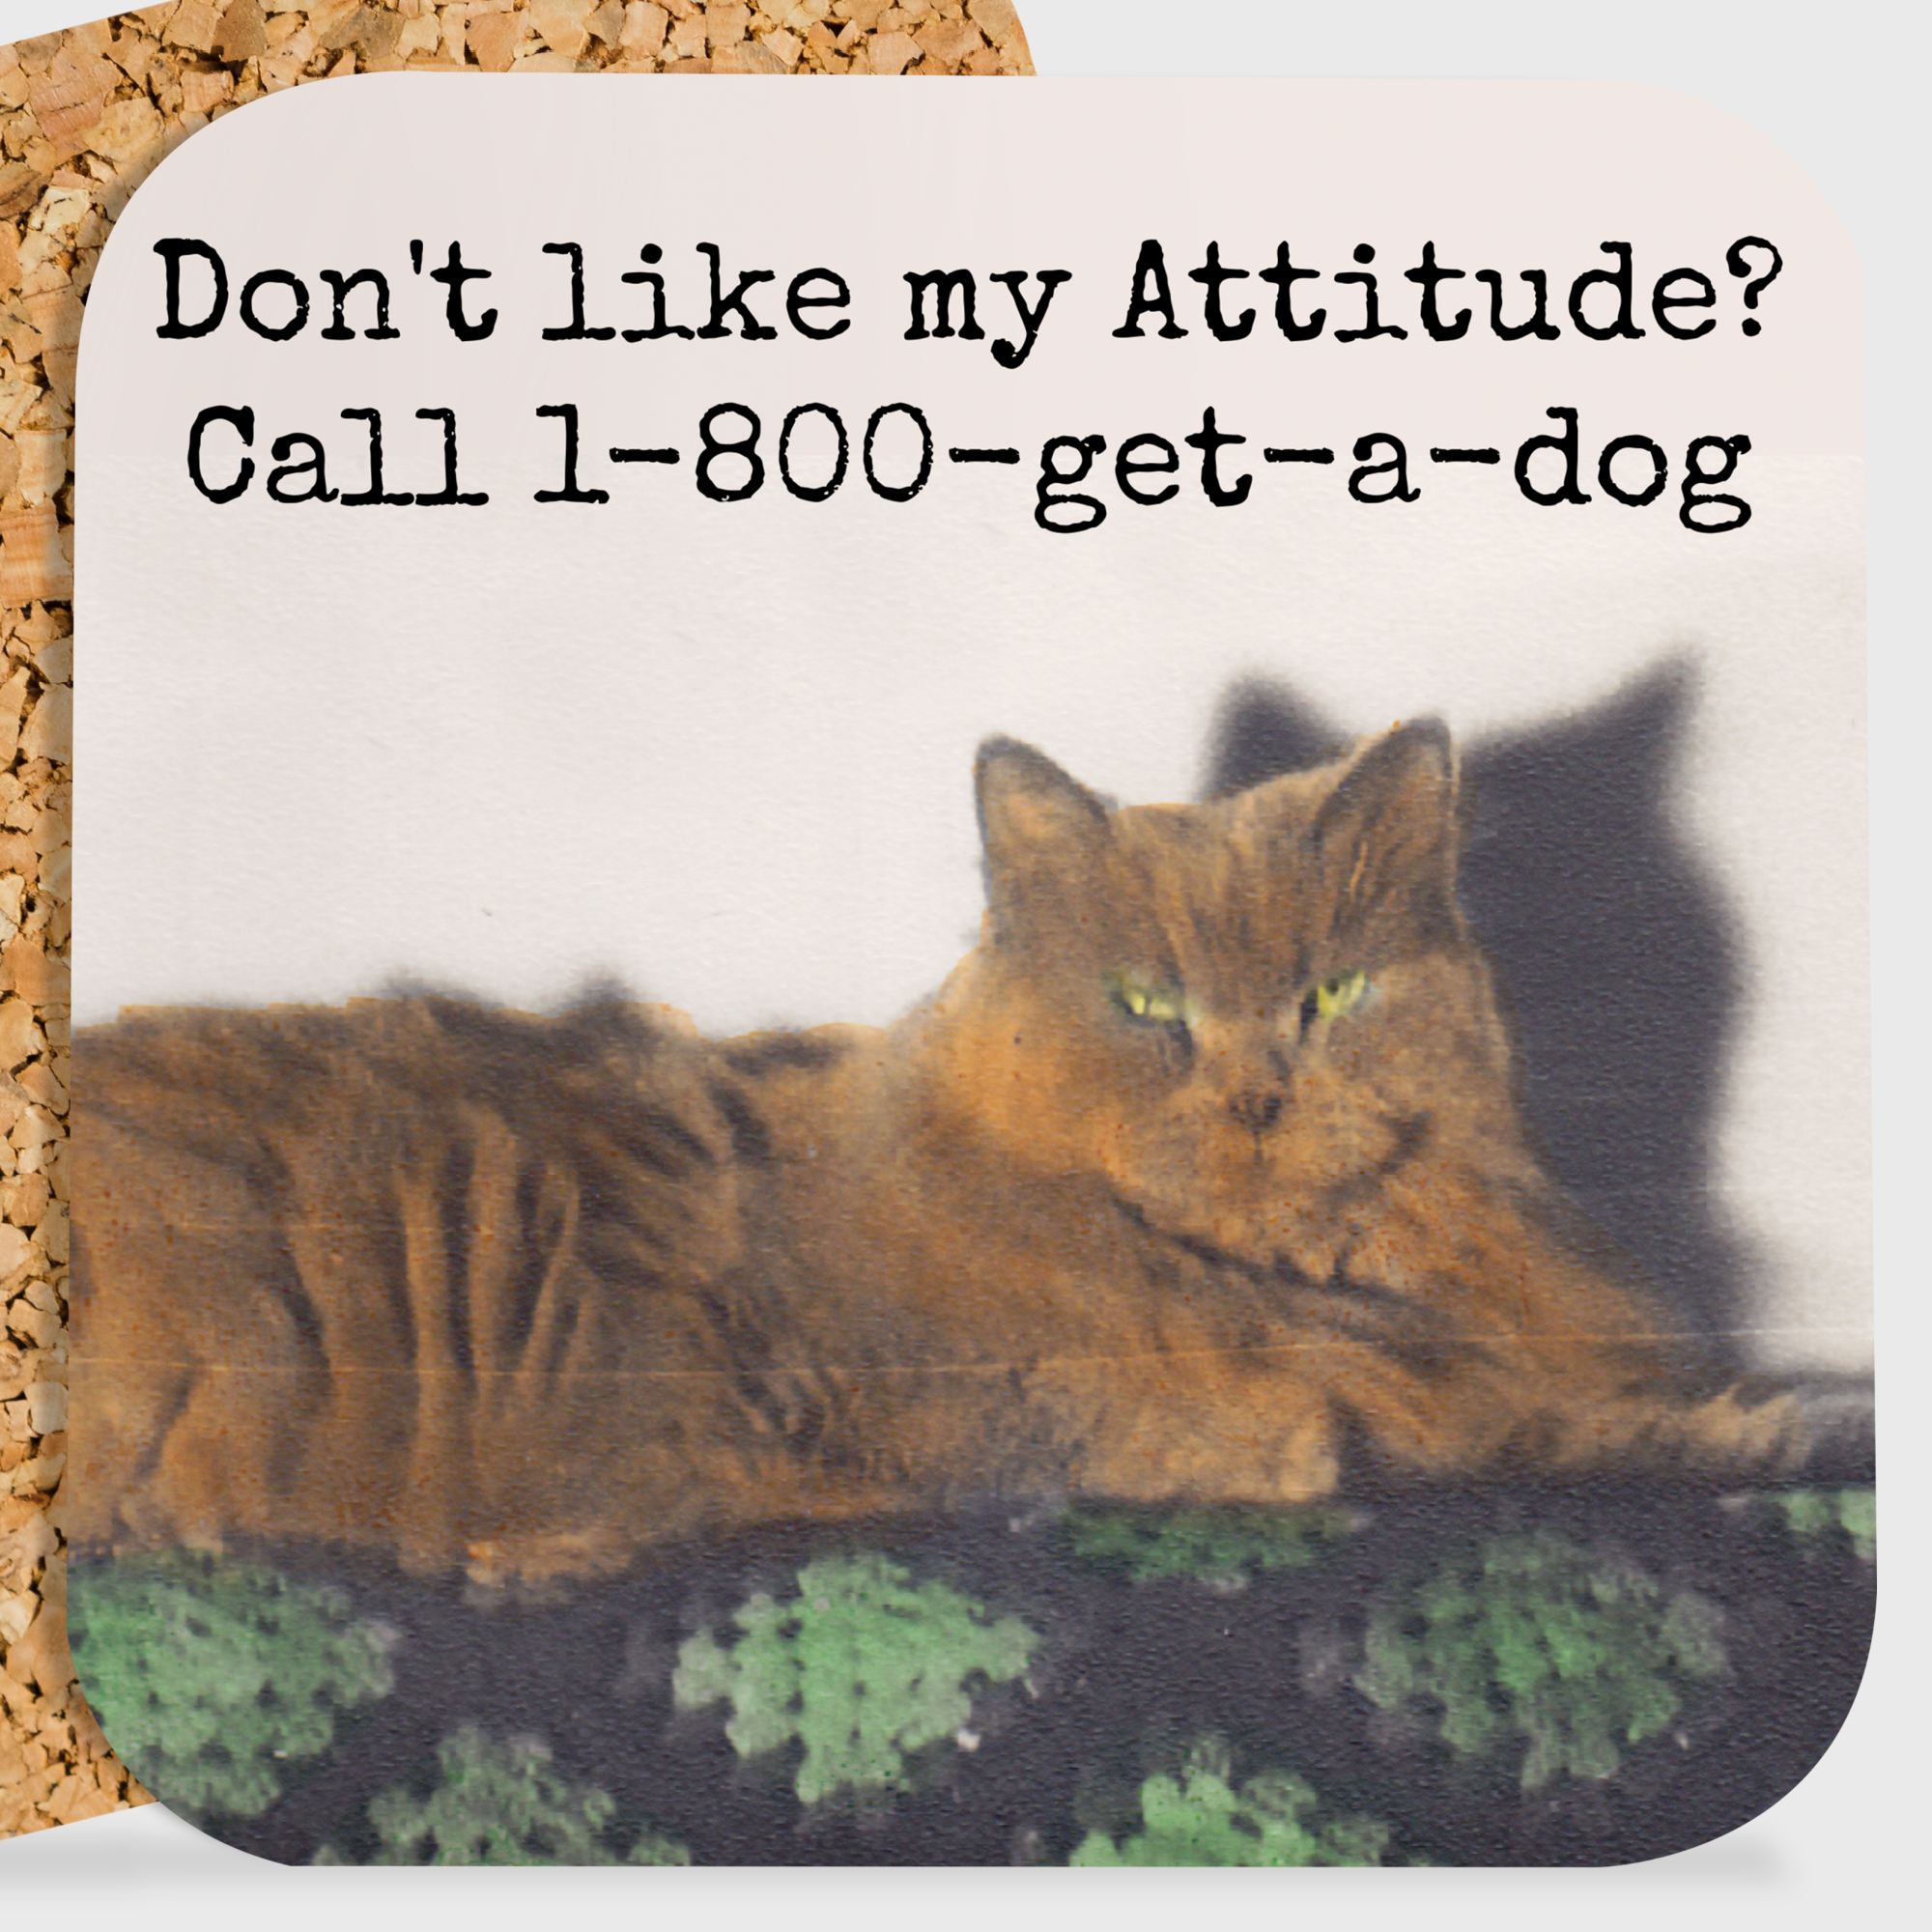 COASTER. Call 1-800-get-a-dog. Funny Vintage Cat Photo Gift.